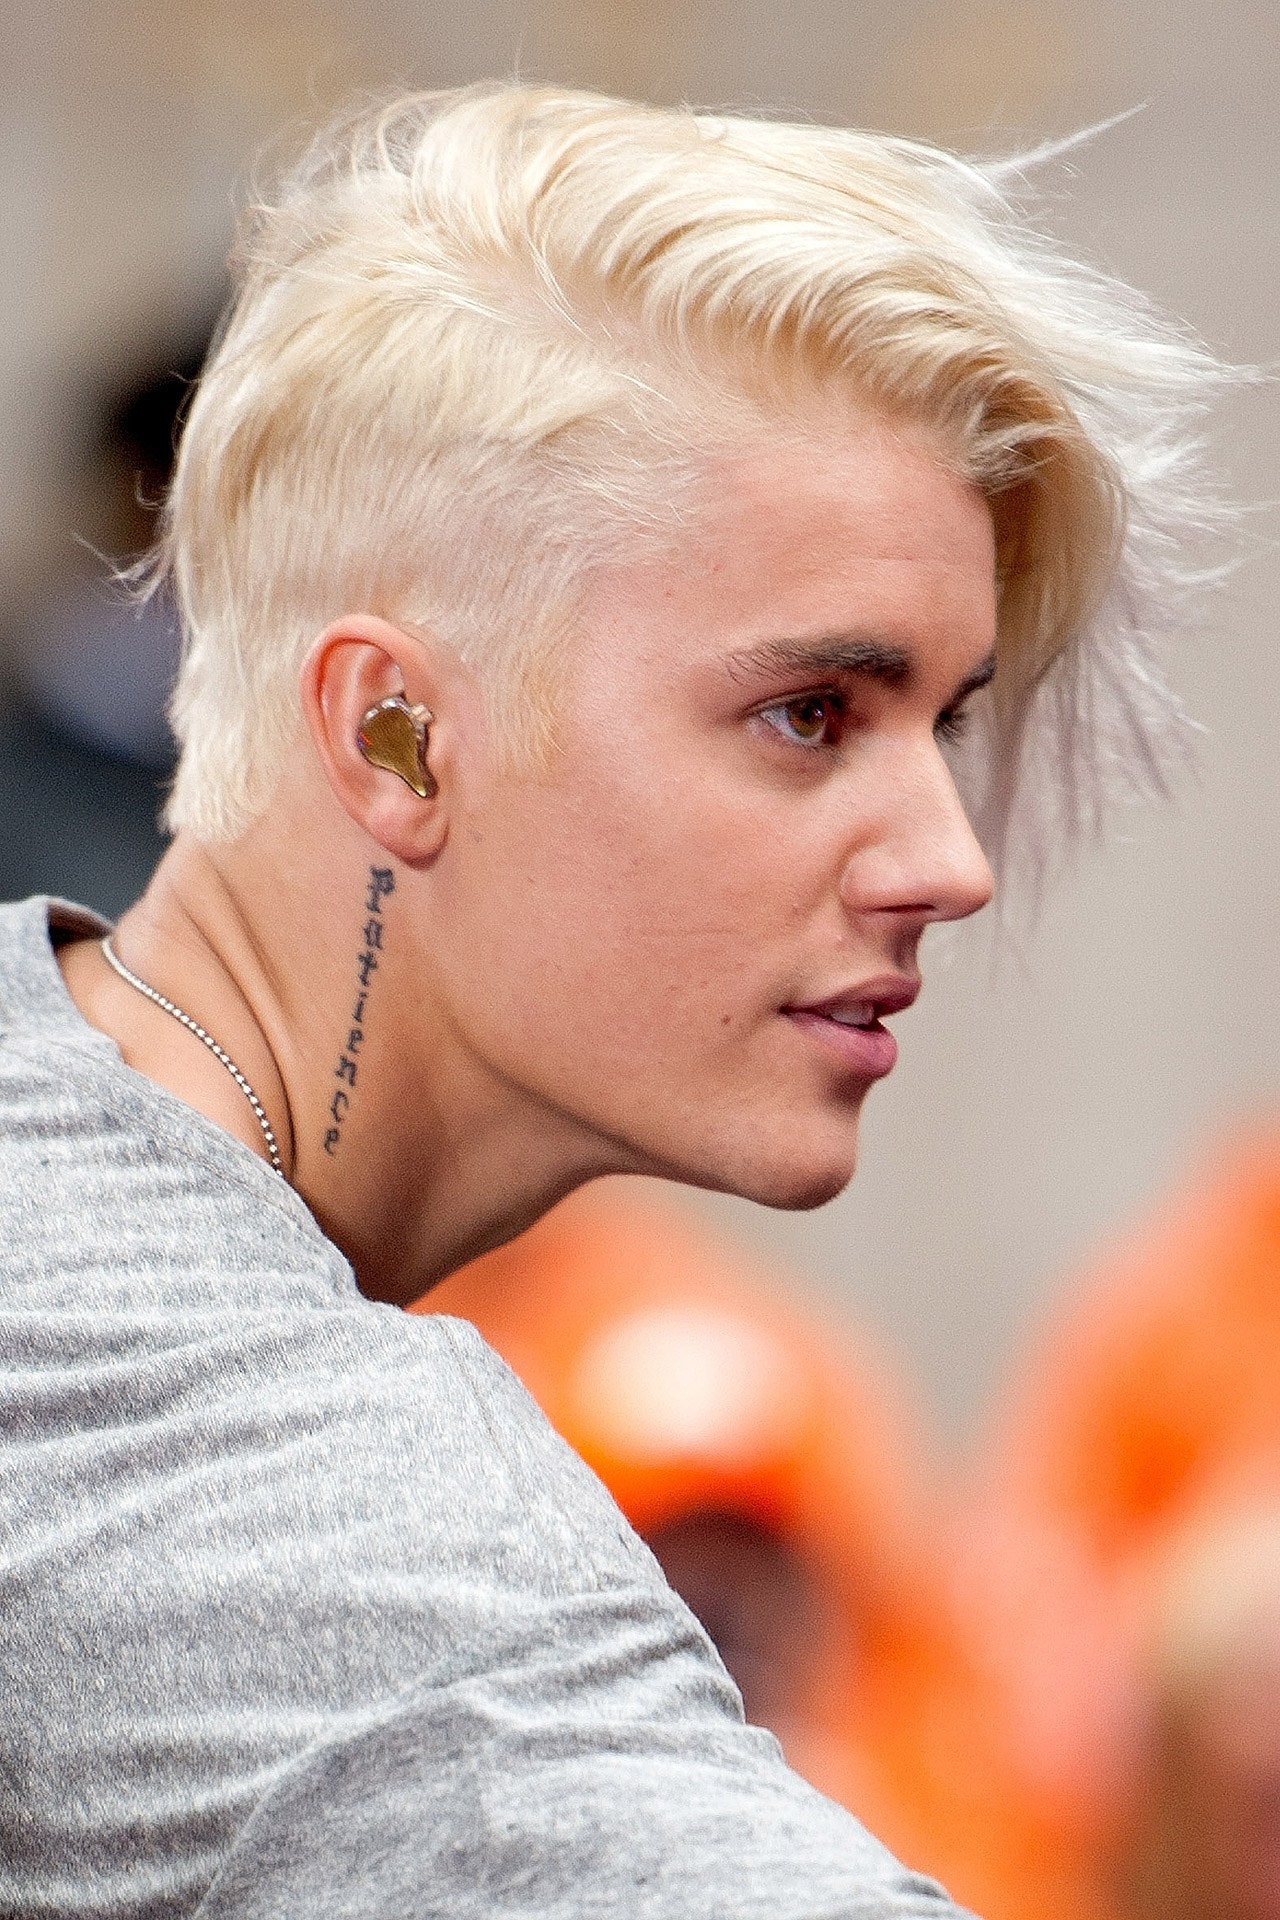 Justin Bieber Haircut: 20 Justin Bieber Celebrity Hairstyles from Past  Years - AtoZ Hairstyles